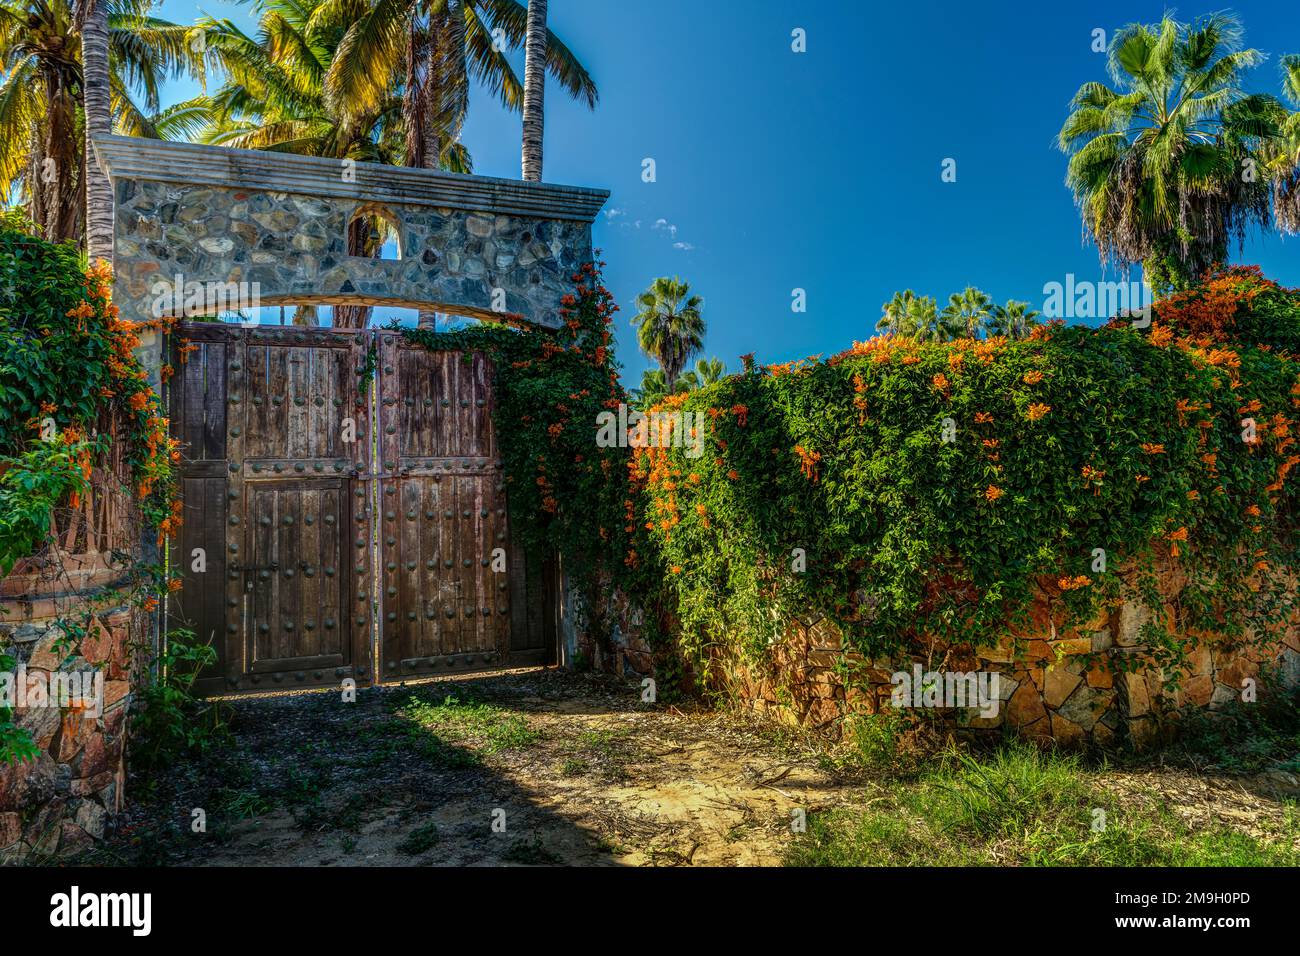 Wooden gate and Mexican flame vine (Pseudogynoxys chenopodioides), Baja California Sur, Mexico Stock Photo